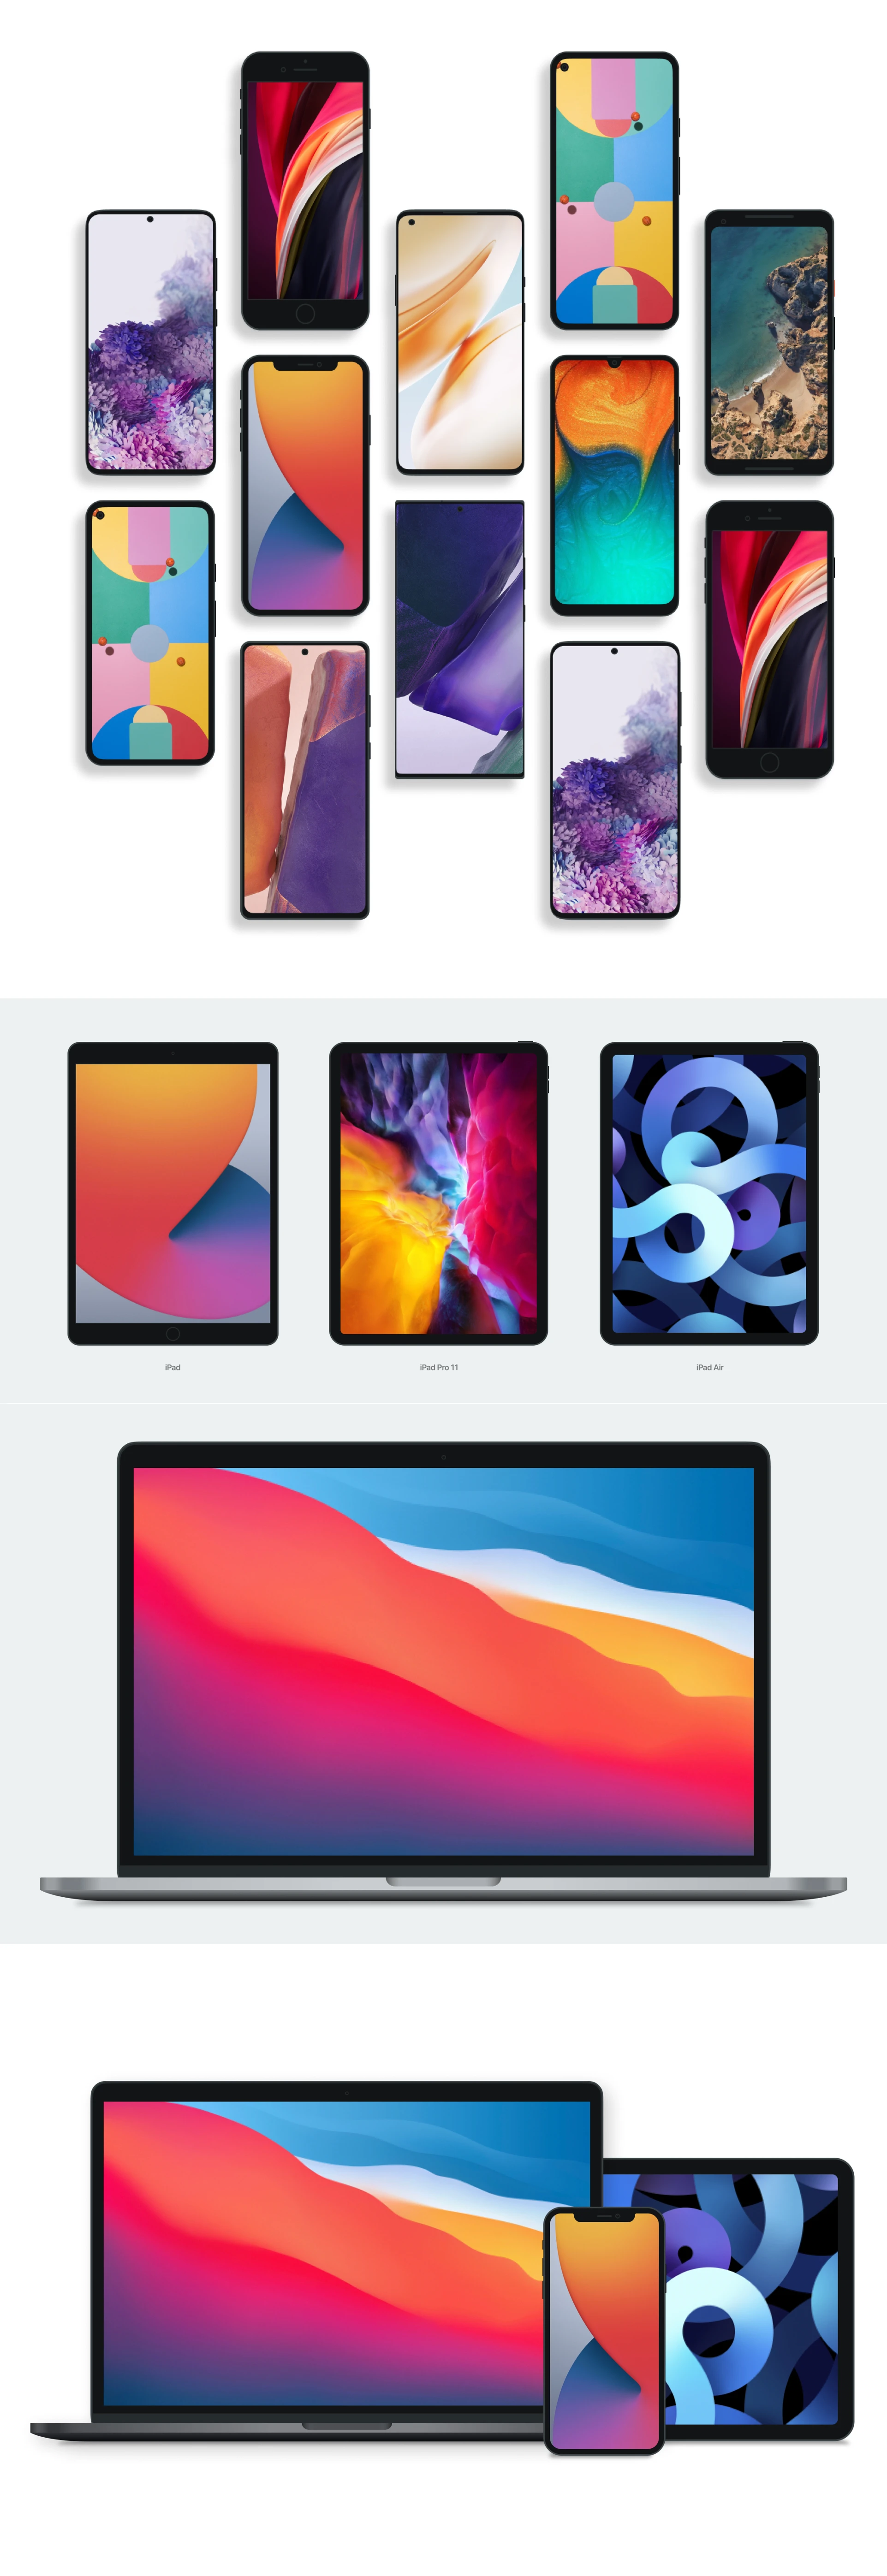 Free Device Mockups for Figma - Free vector mockups for various mobile devices including: